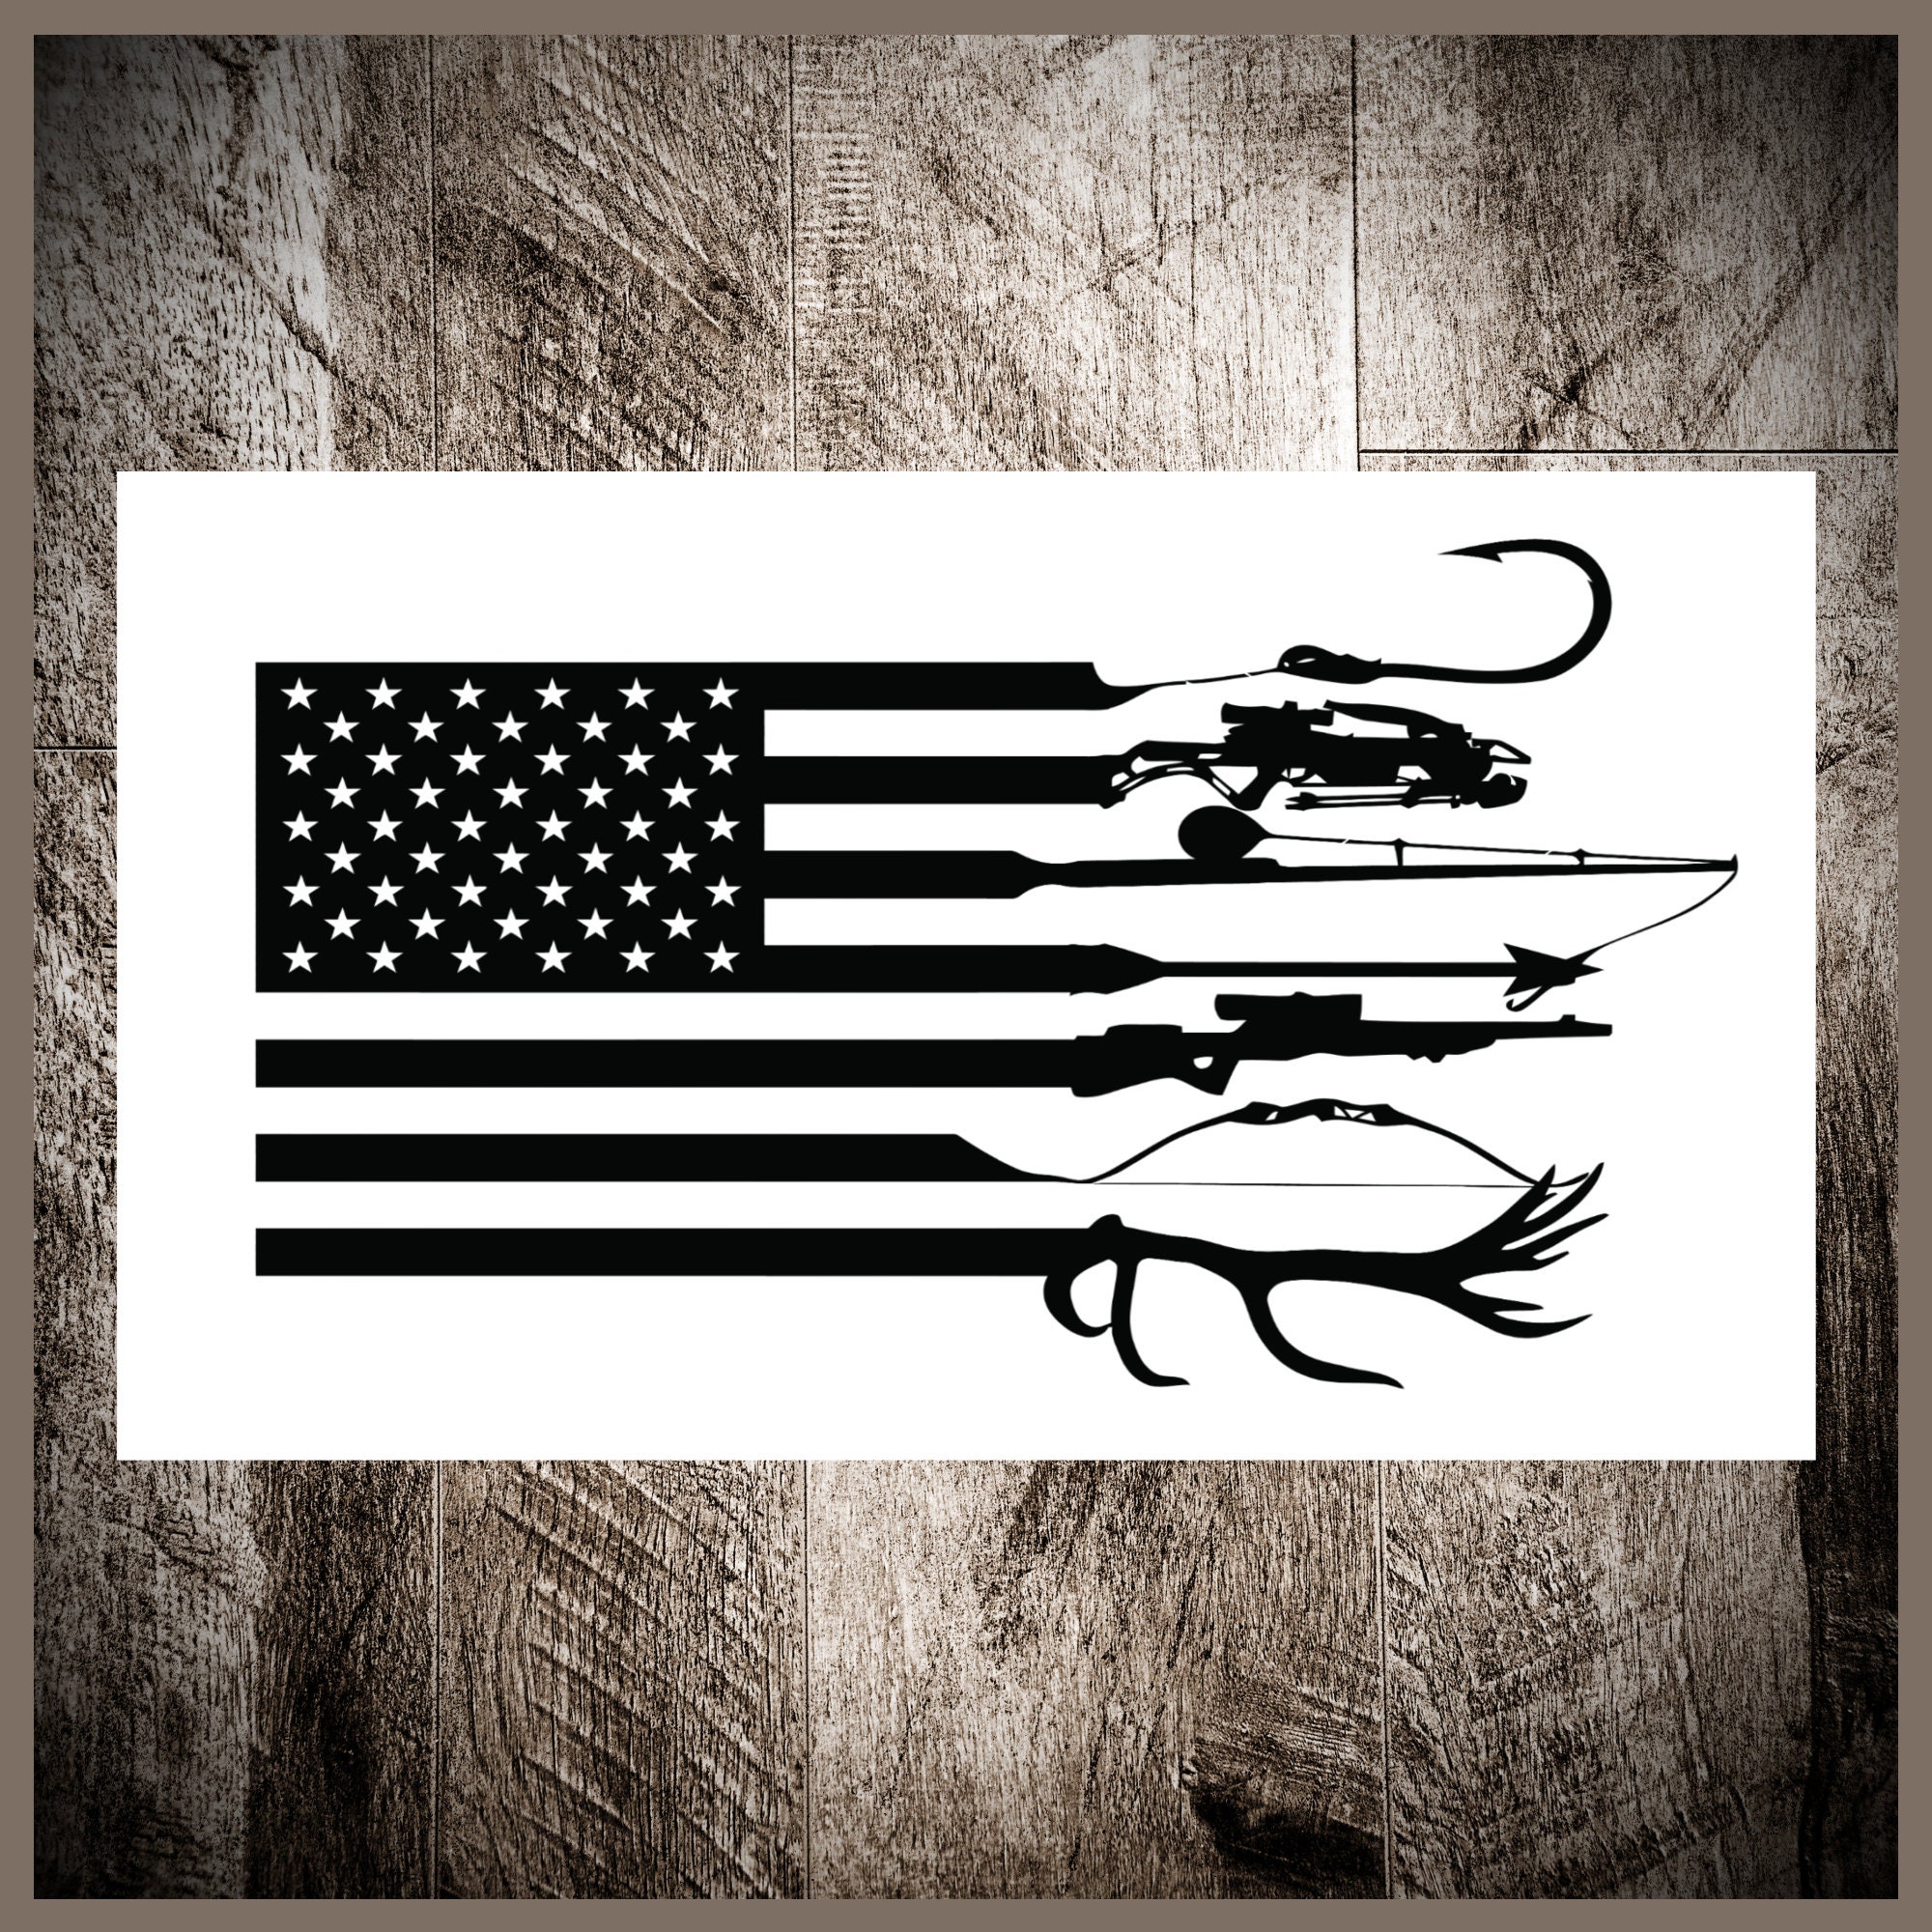 Fishing Sticker Rod USA Flag Waterproof - Buy Any 4 For $1.75 Each  Storewide! 